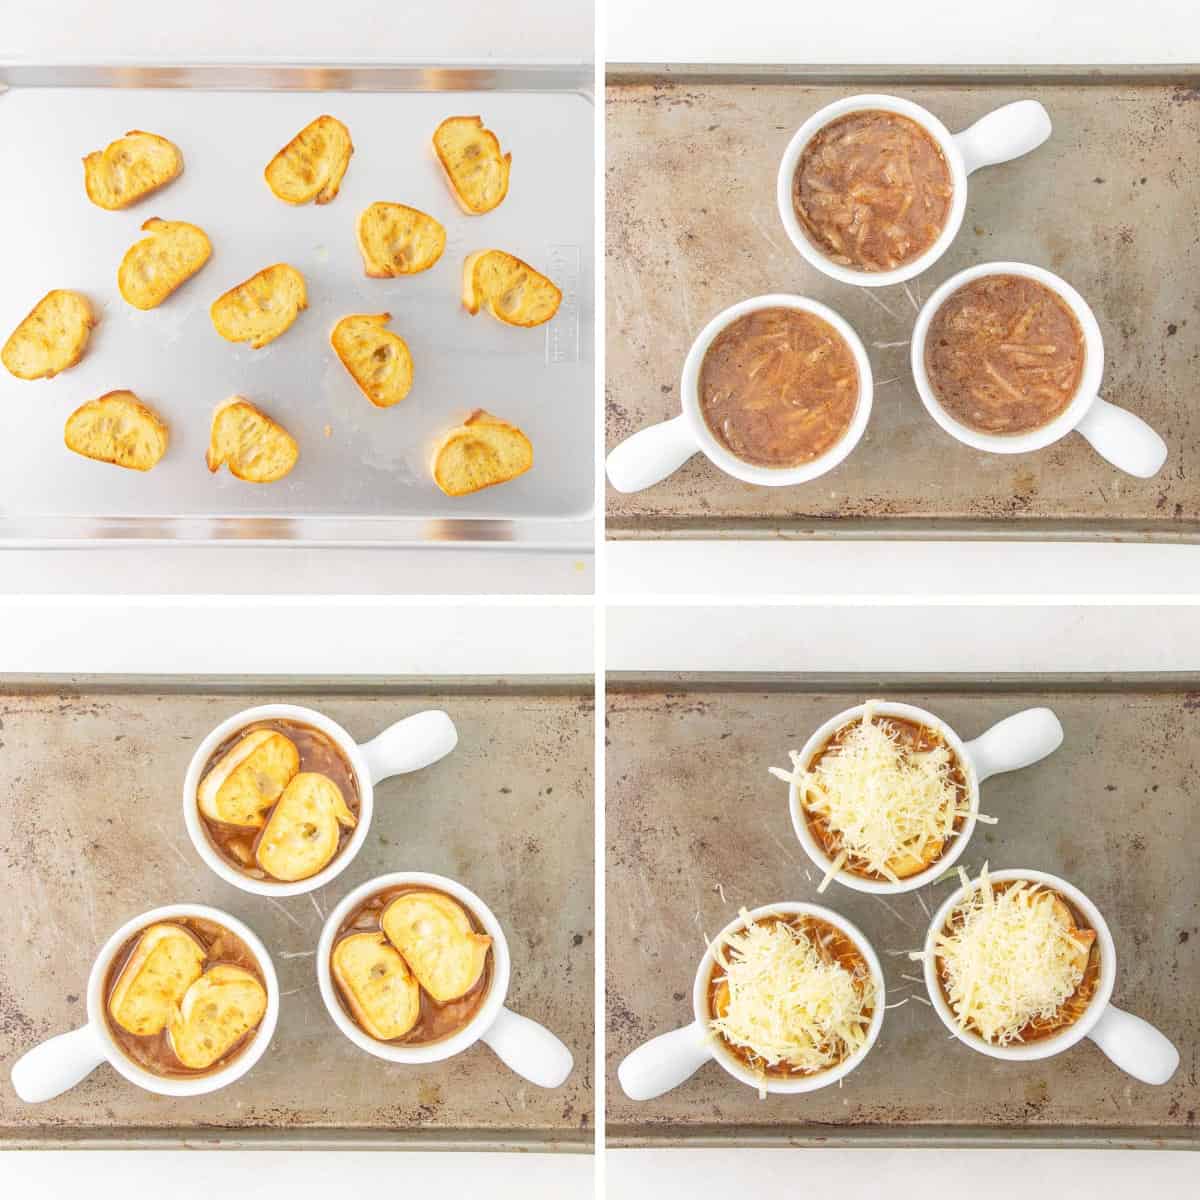 Step-by-step photos showing how to make French onion soup.